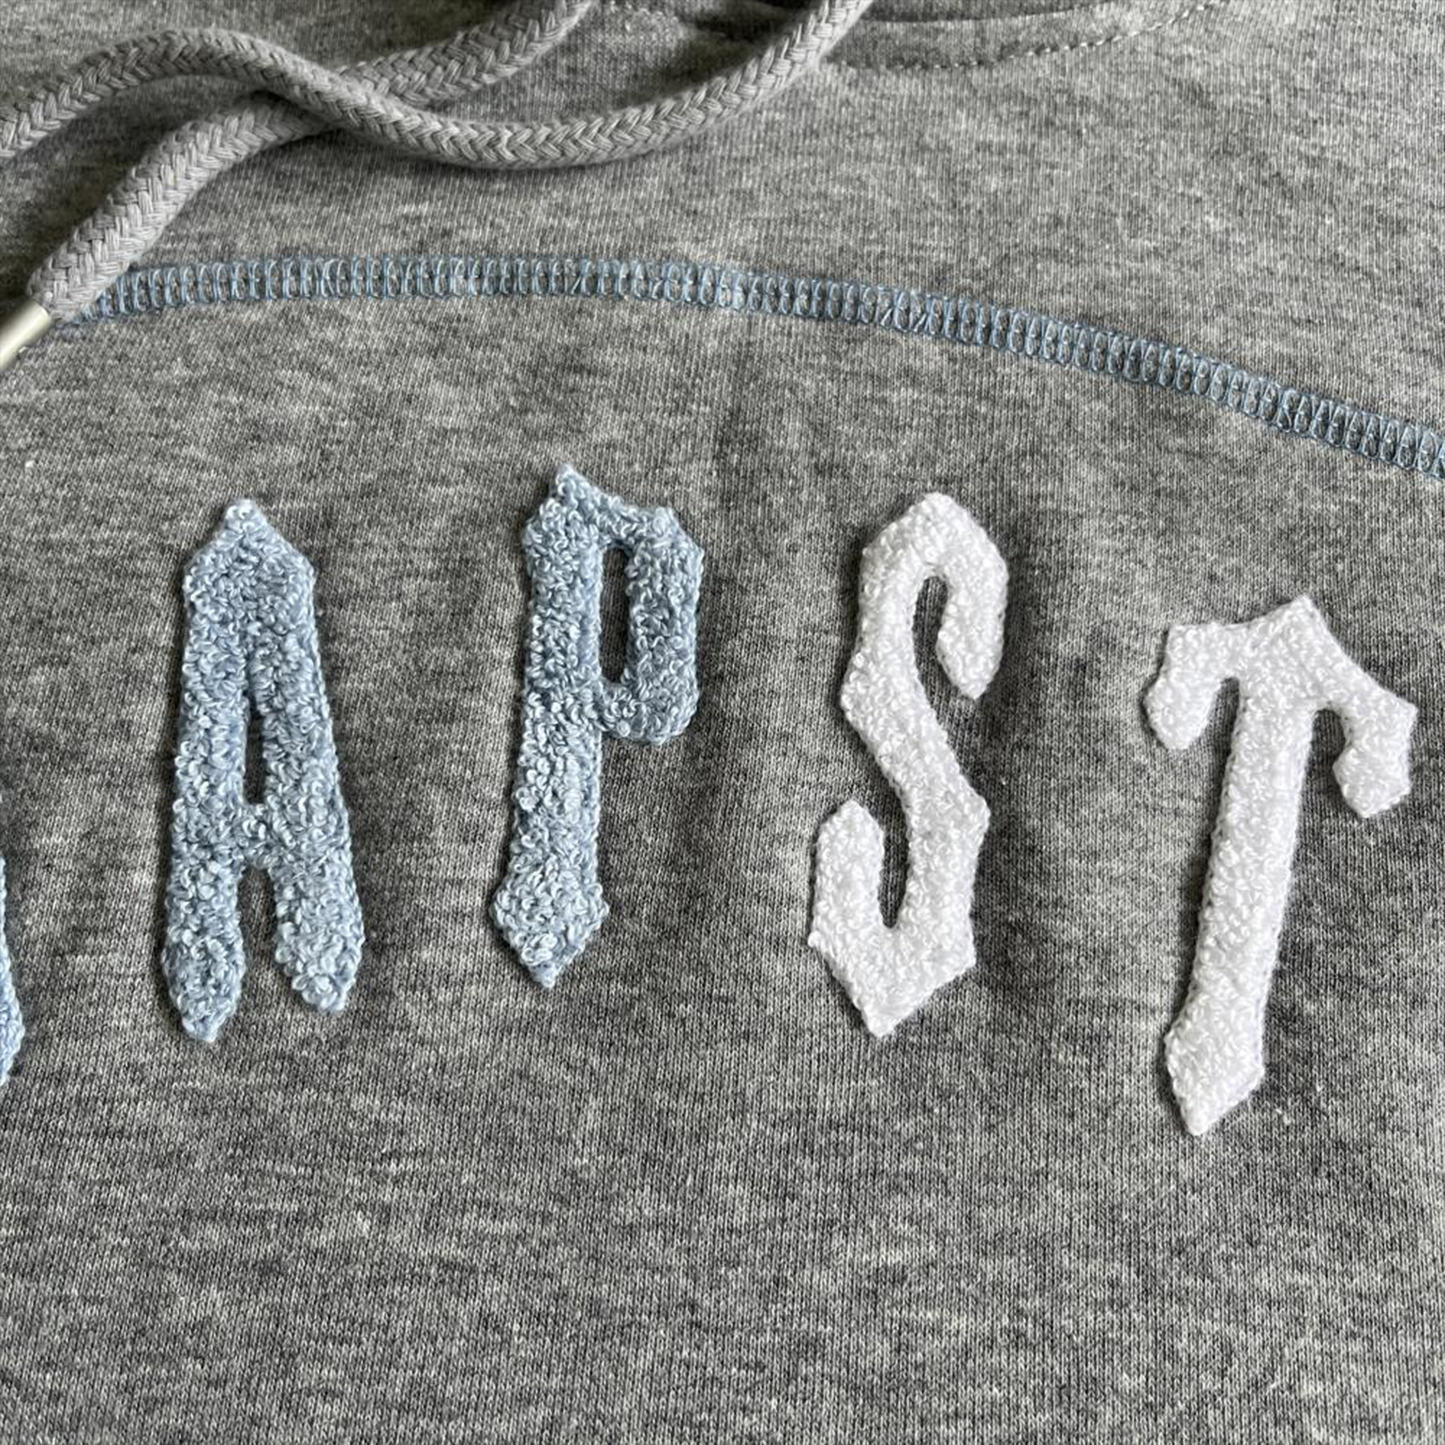 TRAPSTAR IRONGATE CHENILLE ARCH HOODED TRACKSUIT - GREY / ICE BLUE